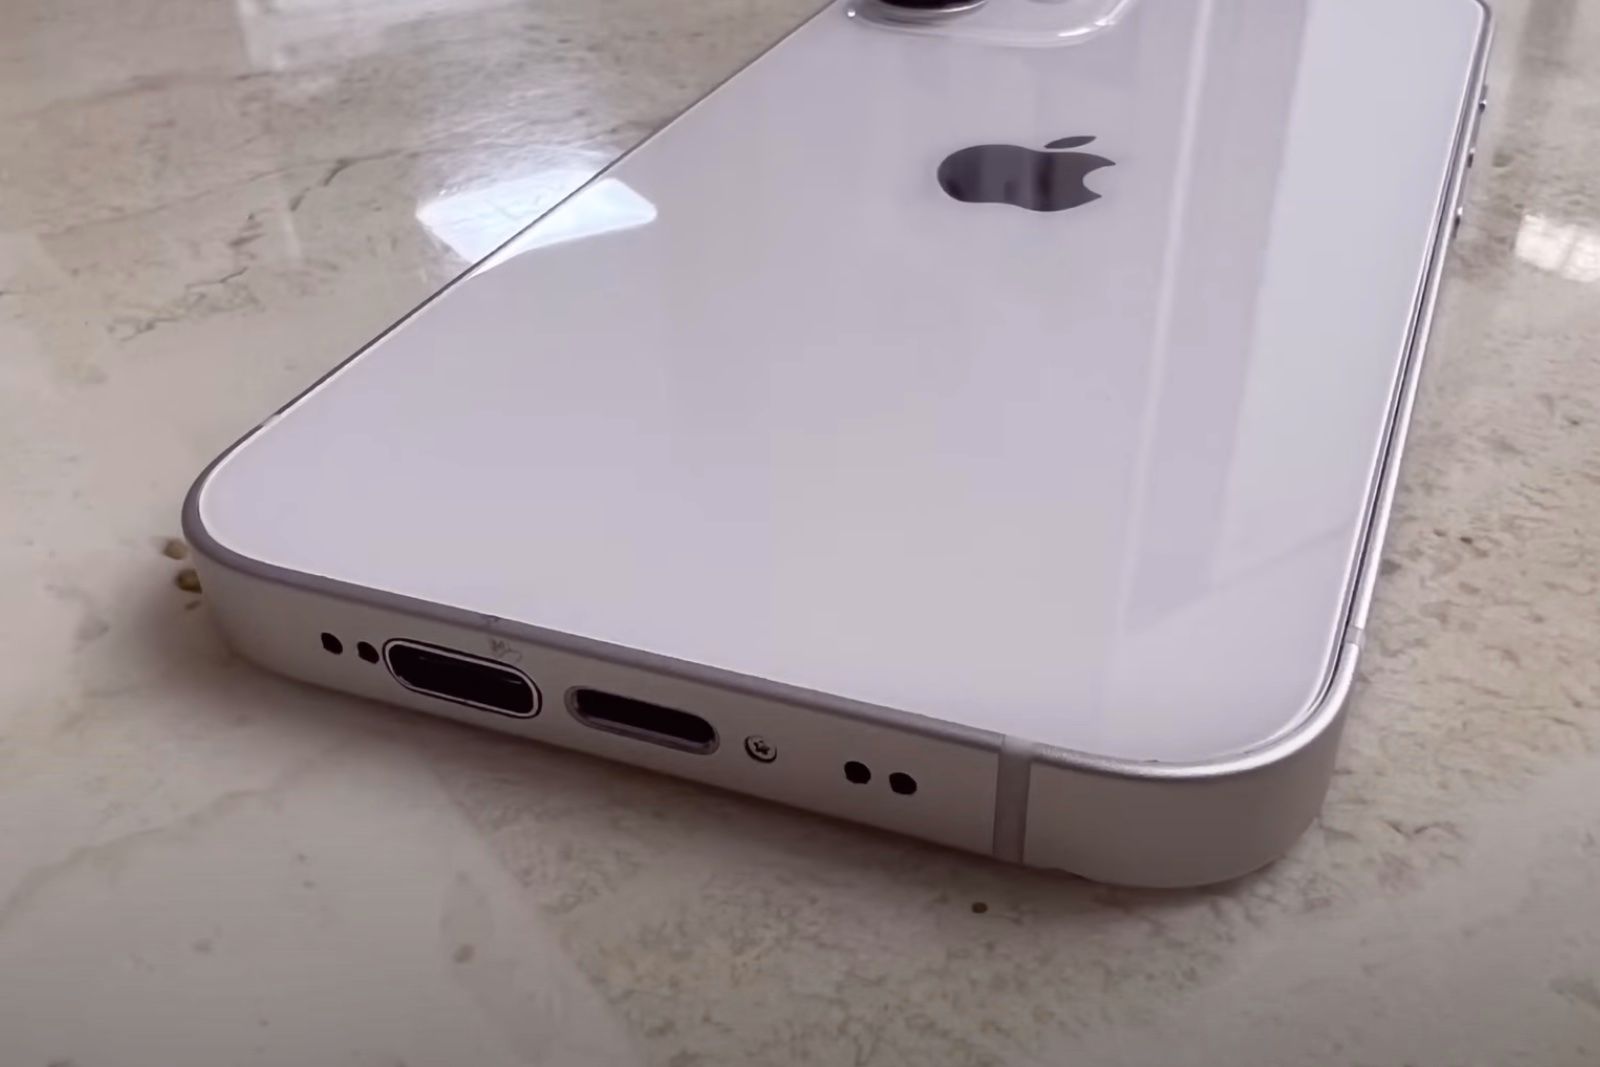 A USB-C iPhone is cool, but this one with both USB-C and Lightning is even cooler